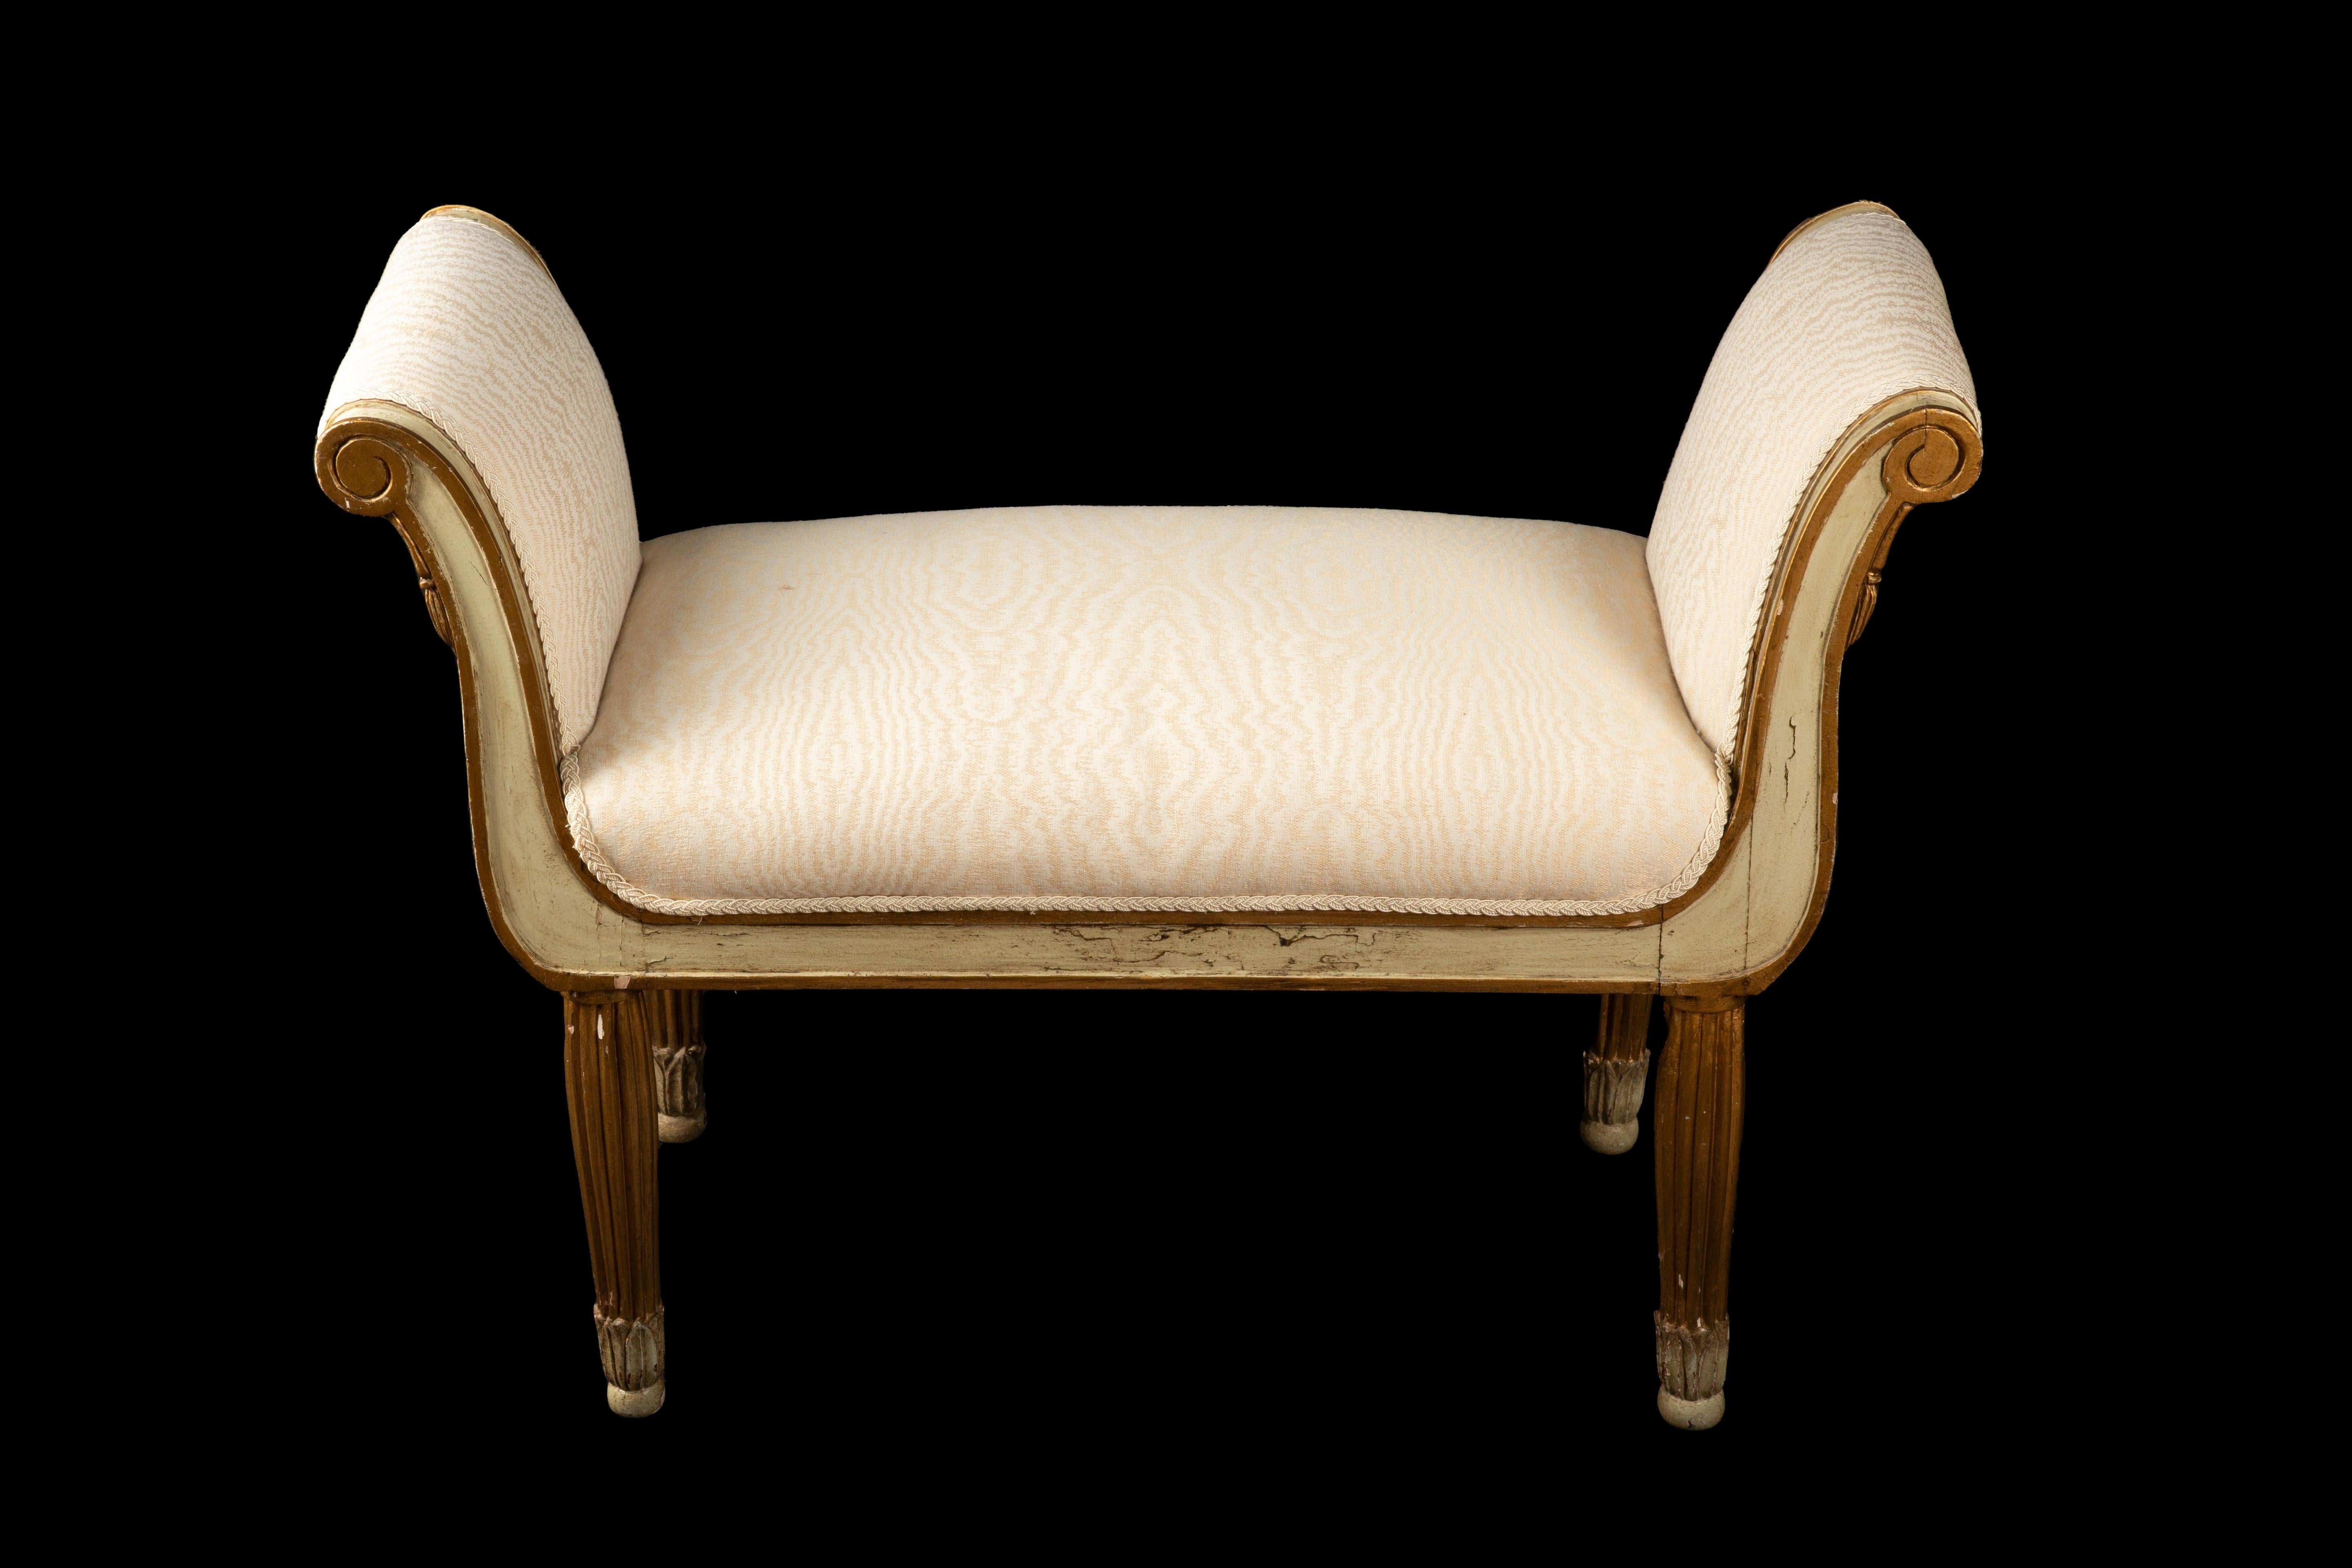  Stunning Italian bench from the 1920s, adorned in a captivating sage hue with intricate gilt accents. This exquisite piece effortlessly encapsulates the elegance and charm of the Roaring Twenties era. Crafted with meticulous attention to detail,